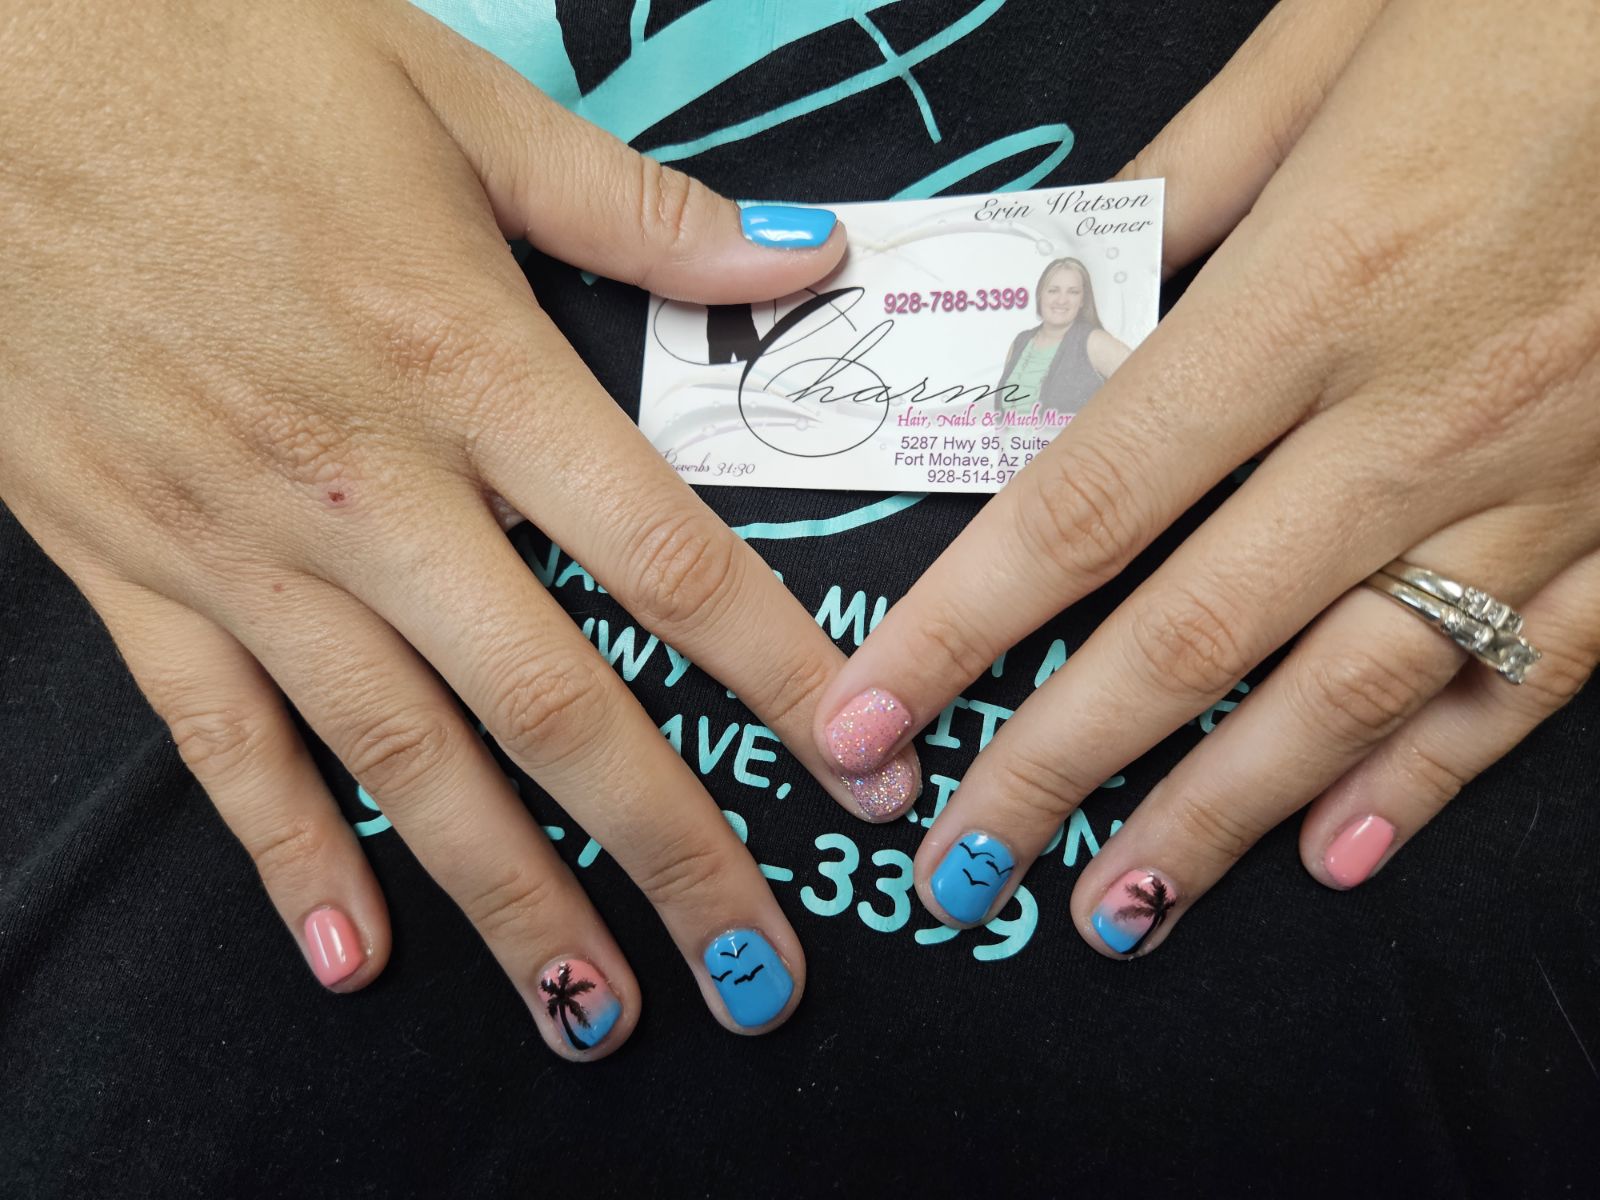 Charm: Hair, Nails & Much More 5287 AZ-95 c, Fort Mohave Arizona 86426